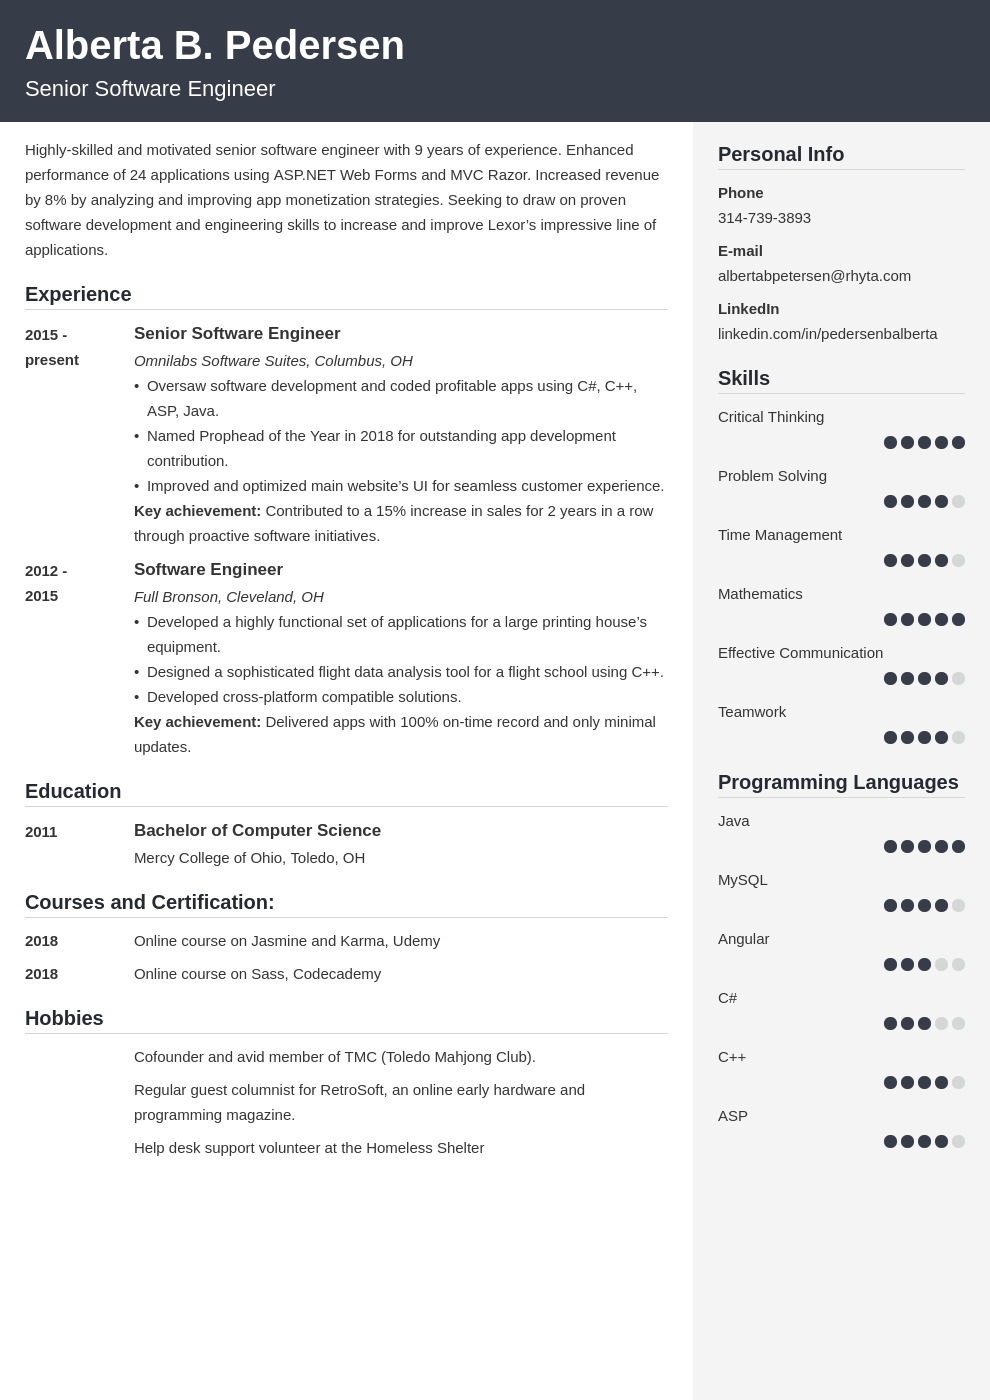 senior-software-engineer-resume-examples-guide-25-tips